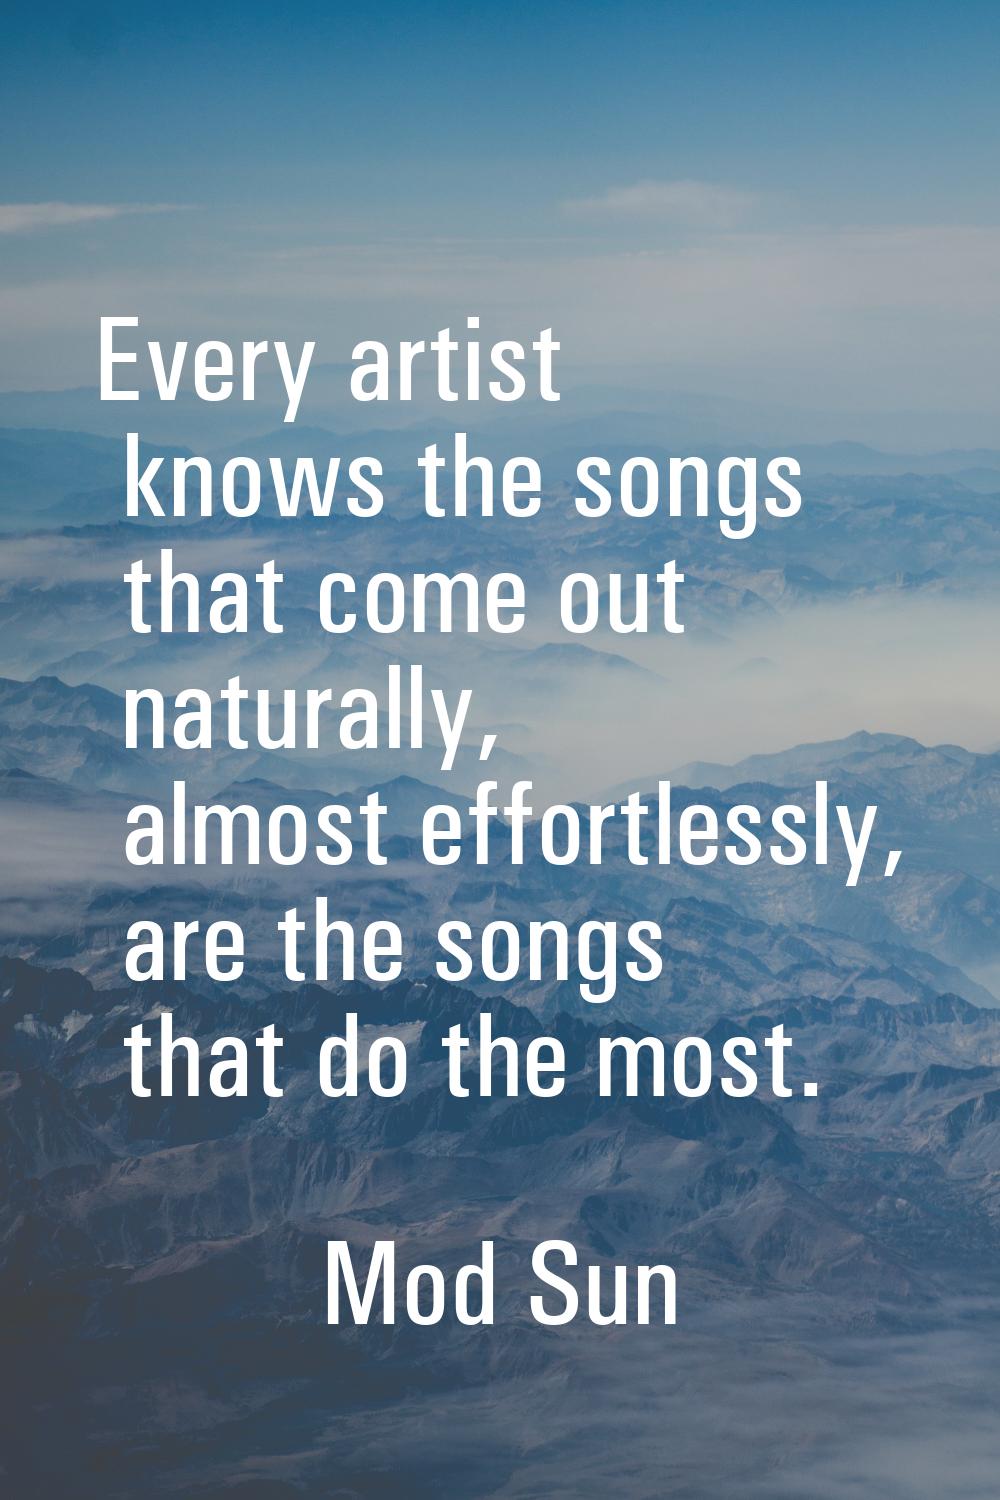 Every artist knows the songs that come out naturally, almost effortlessly, are the songs that do th